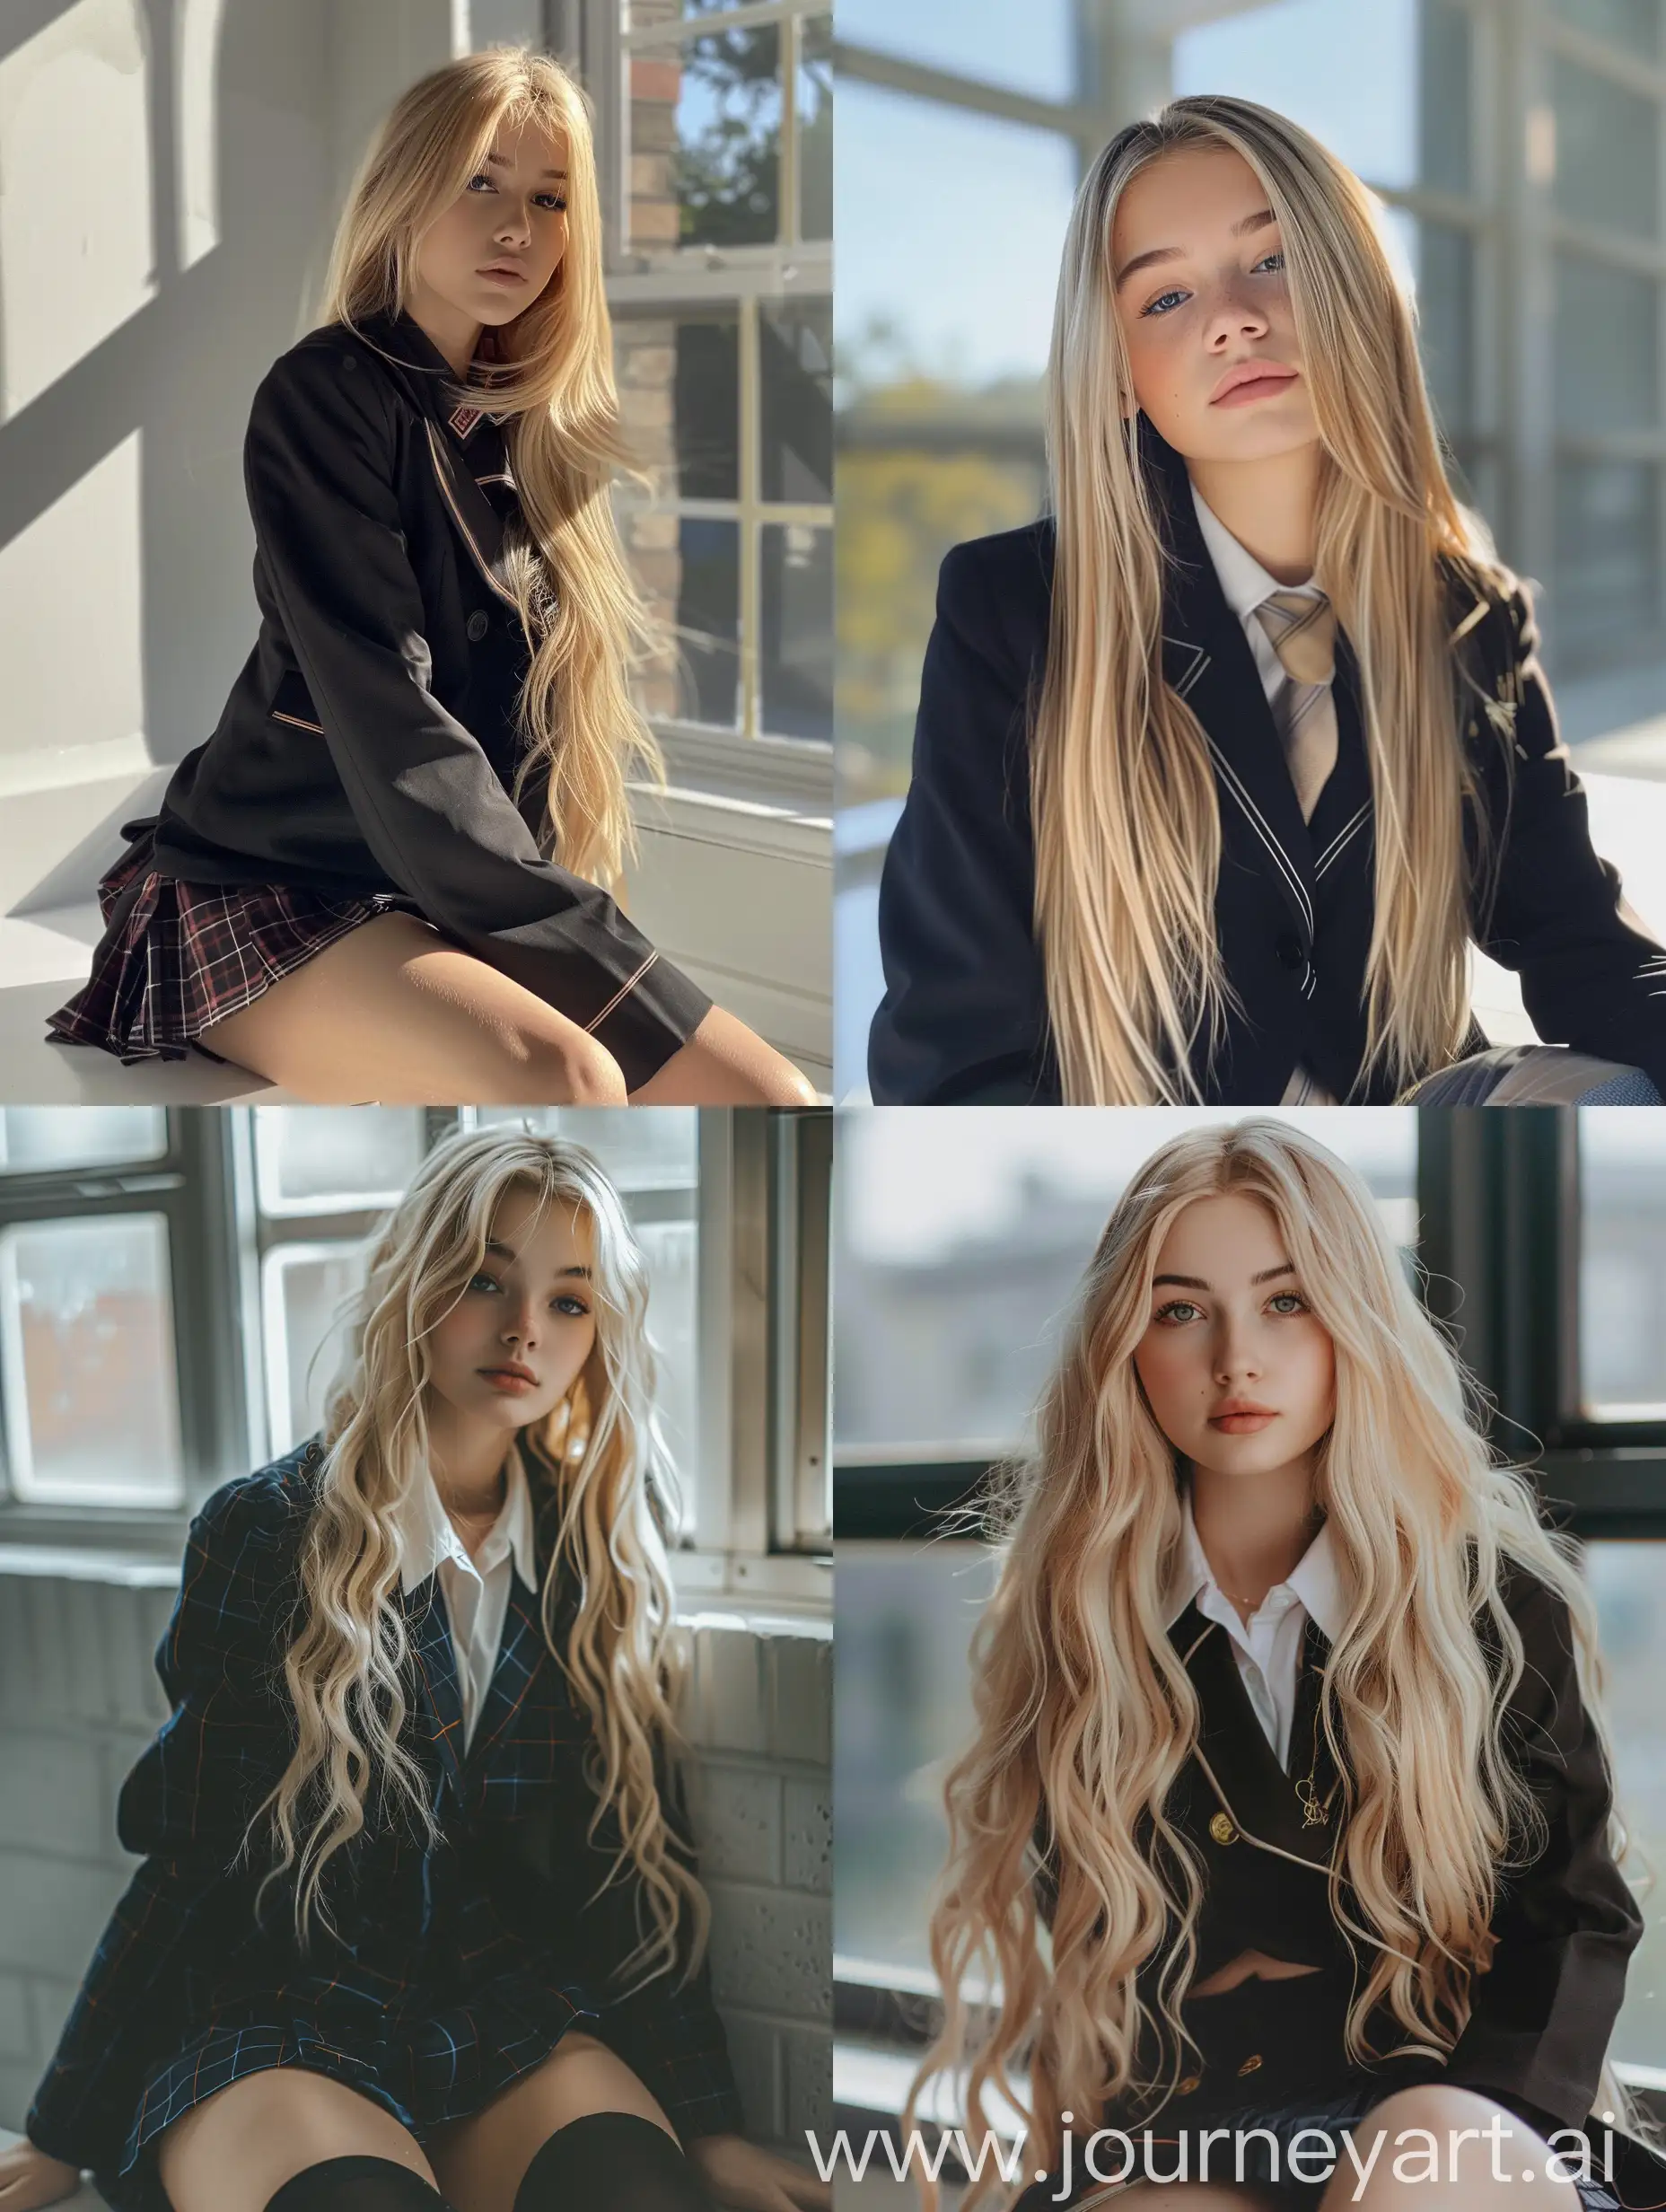 Influencer-Teen-Girl-with-Long-Blond-Hair-in-School-Uniform-Sitting-Down